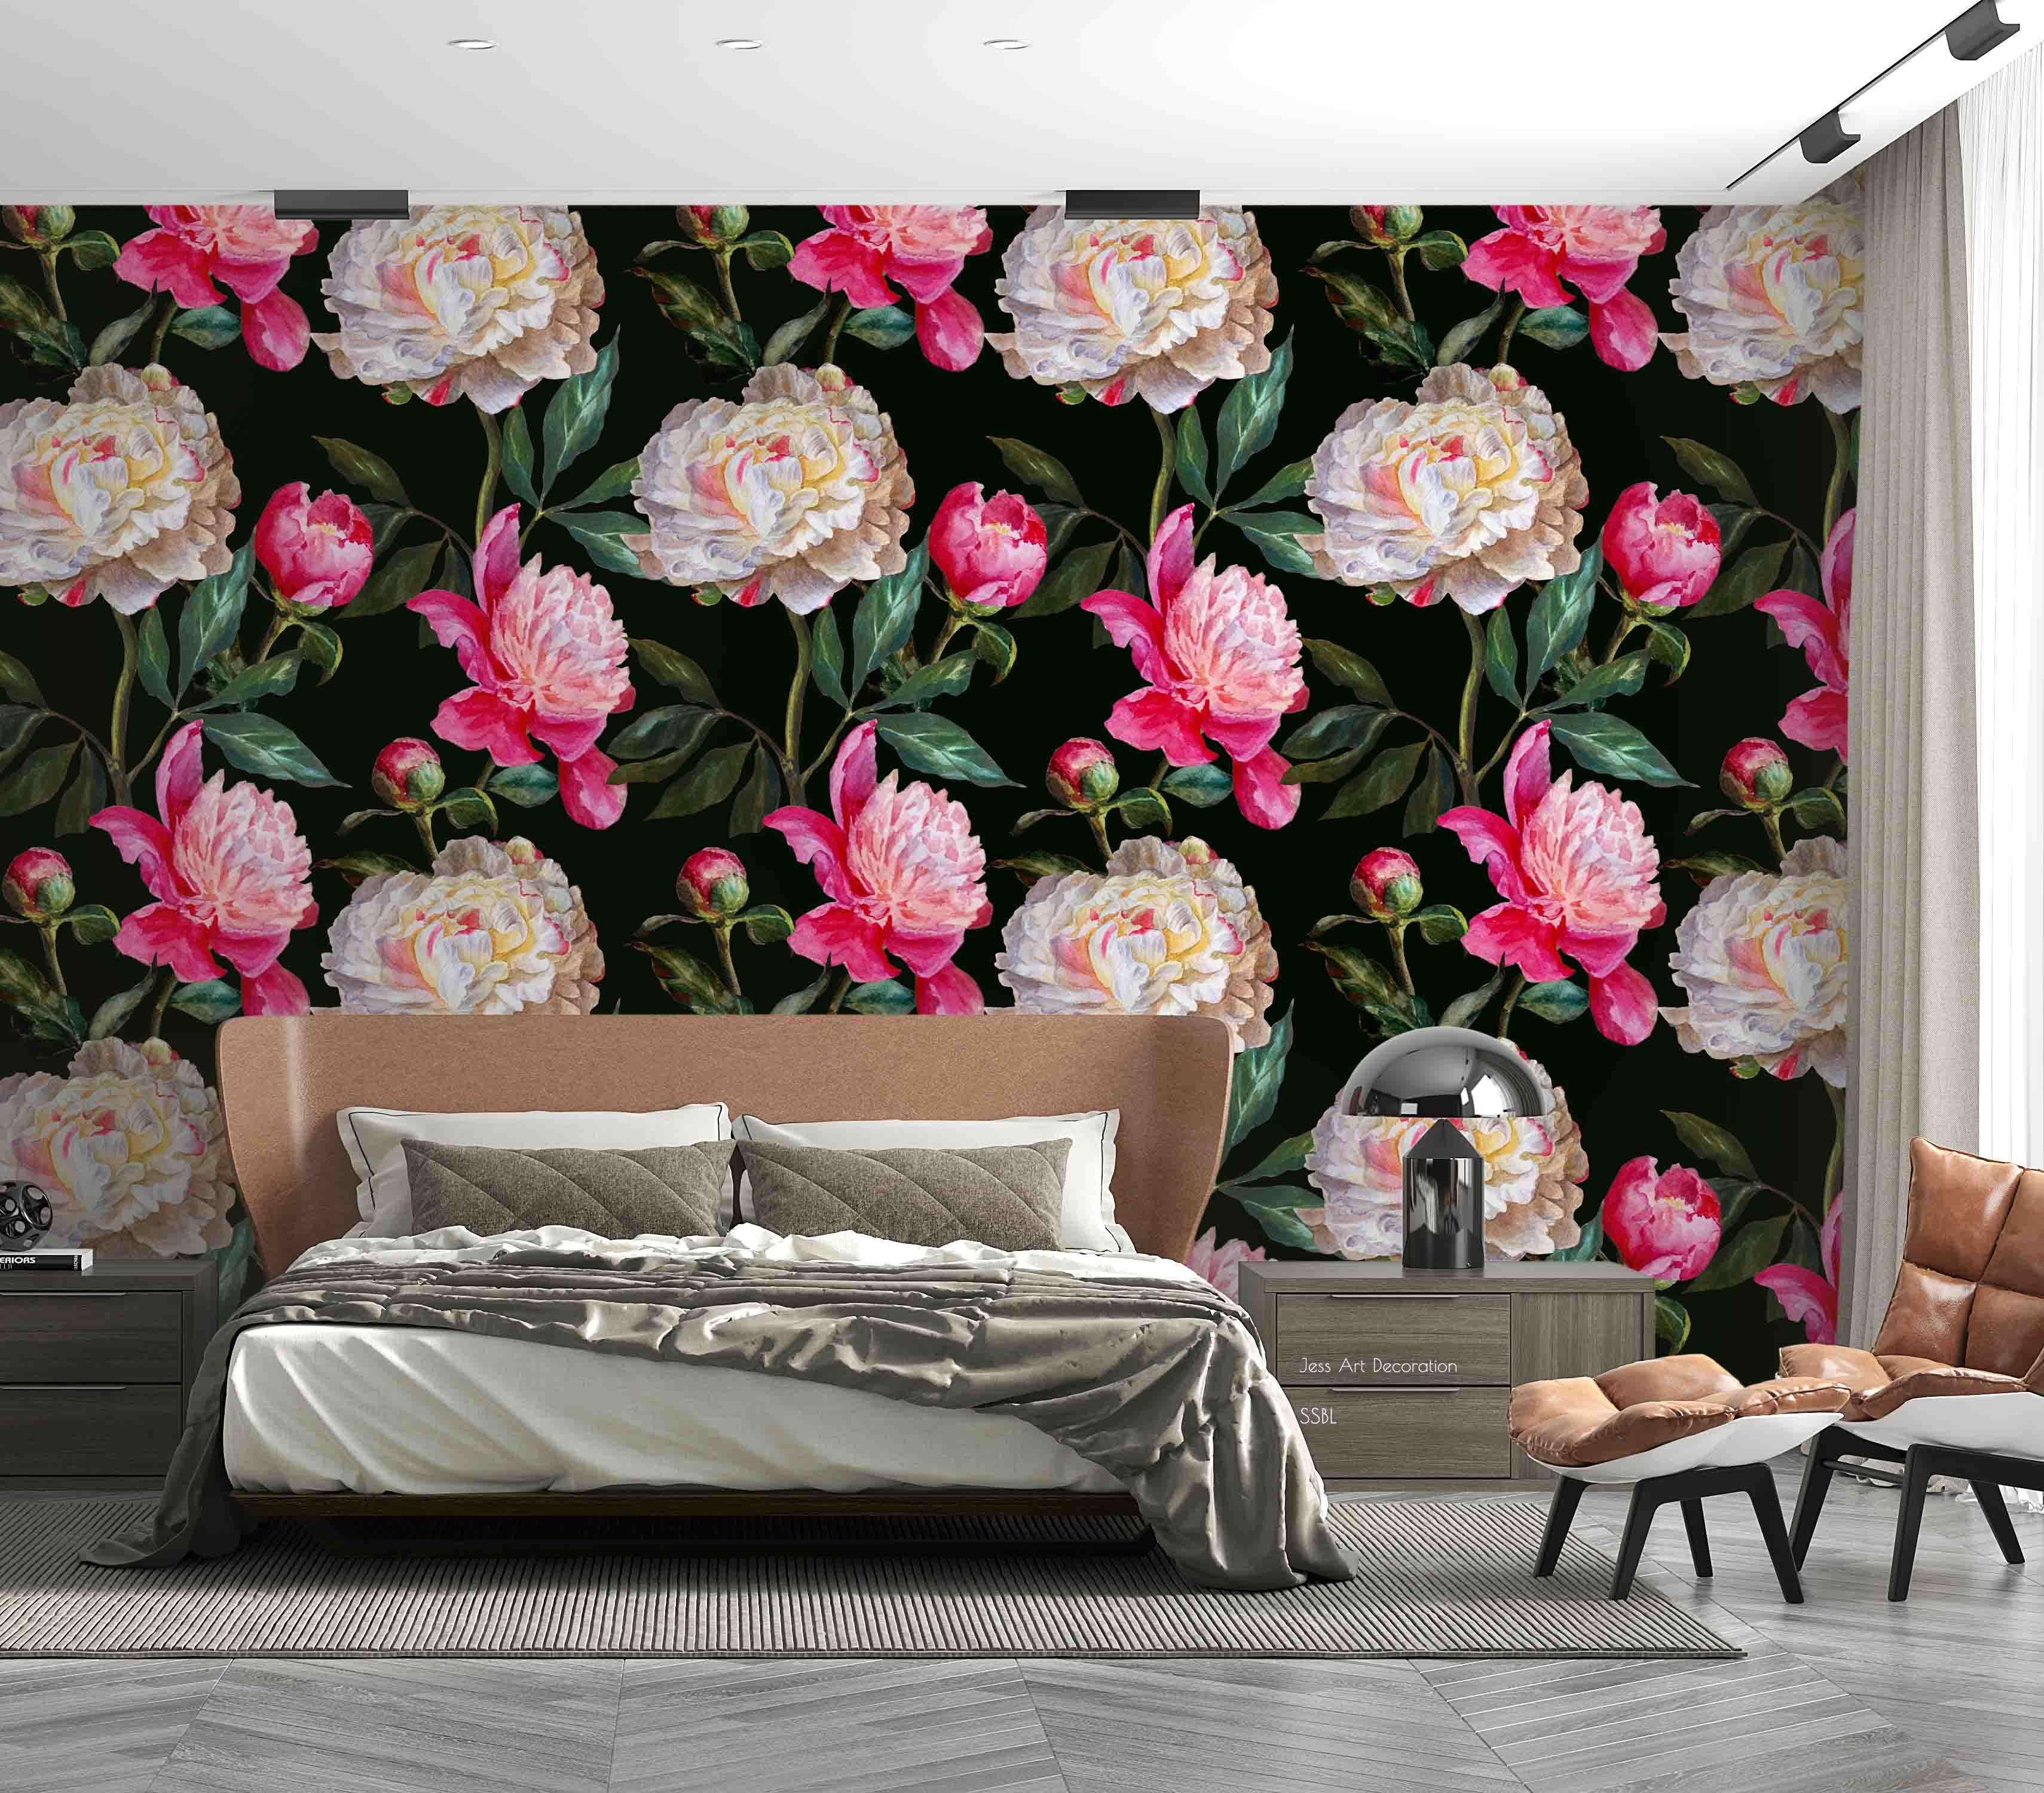 3D Vintage Baroque Art Blooming Peony Flowers Leaves Pattern Wall Mural Wallpaper GD 3637- Jess Art Decoration